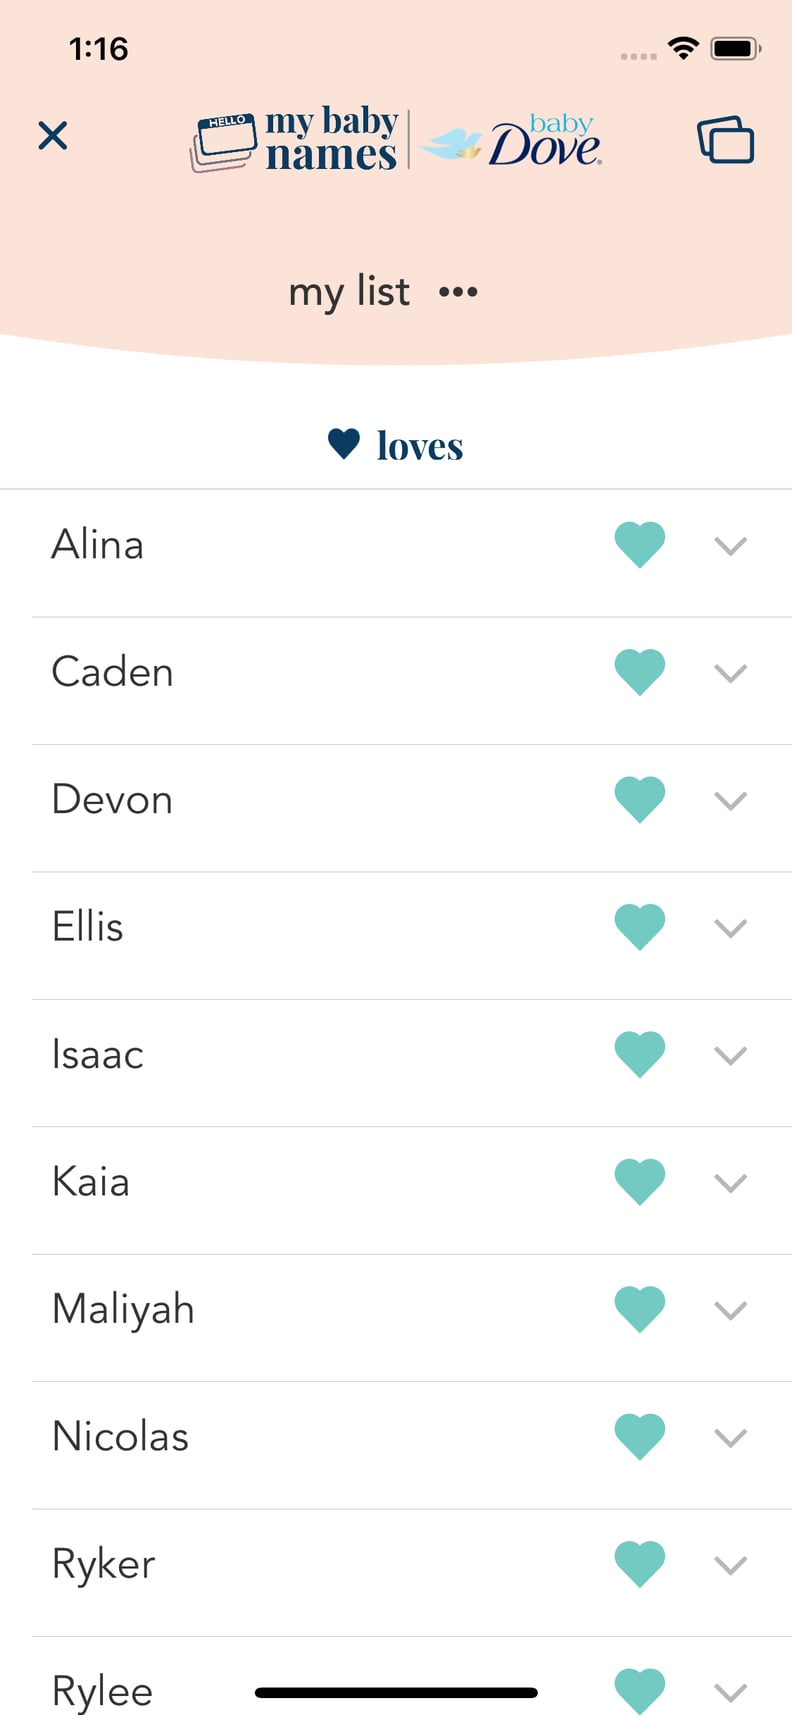 What Your List of "Loves" and "Likes" Will Look Like After You've Swiped